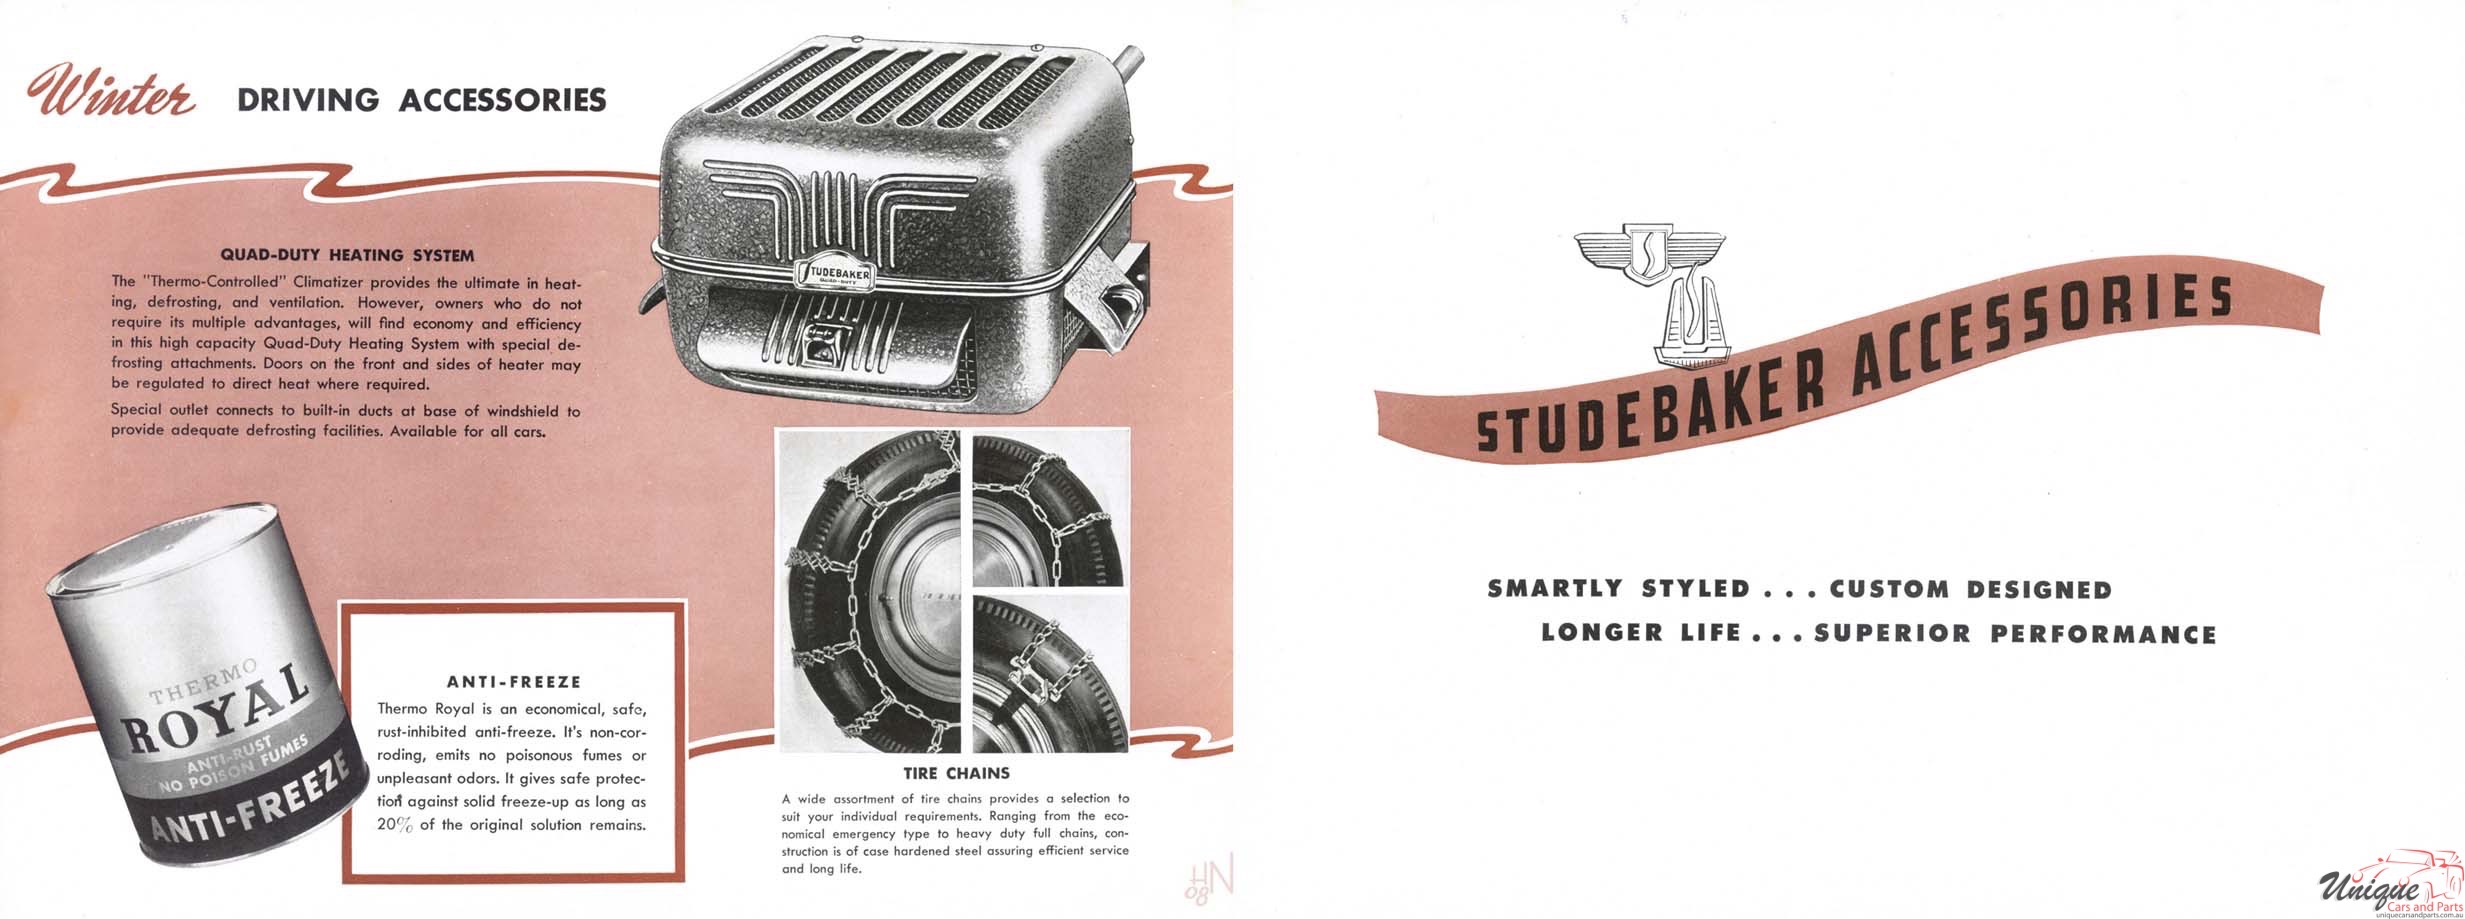 1947 Studebaker Accessories Booklet Page 3